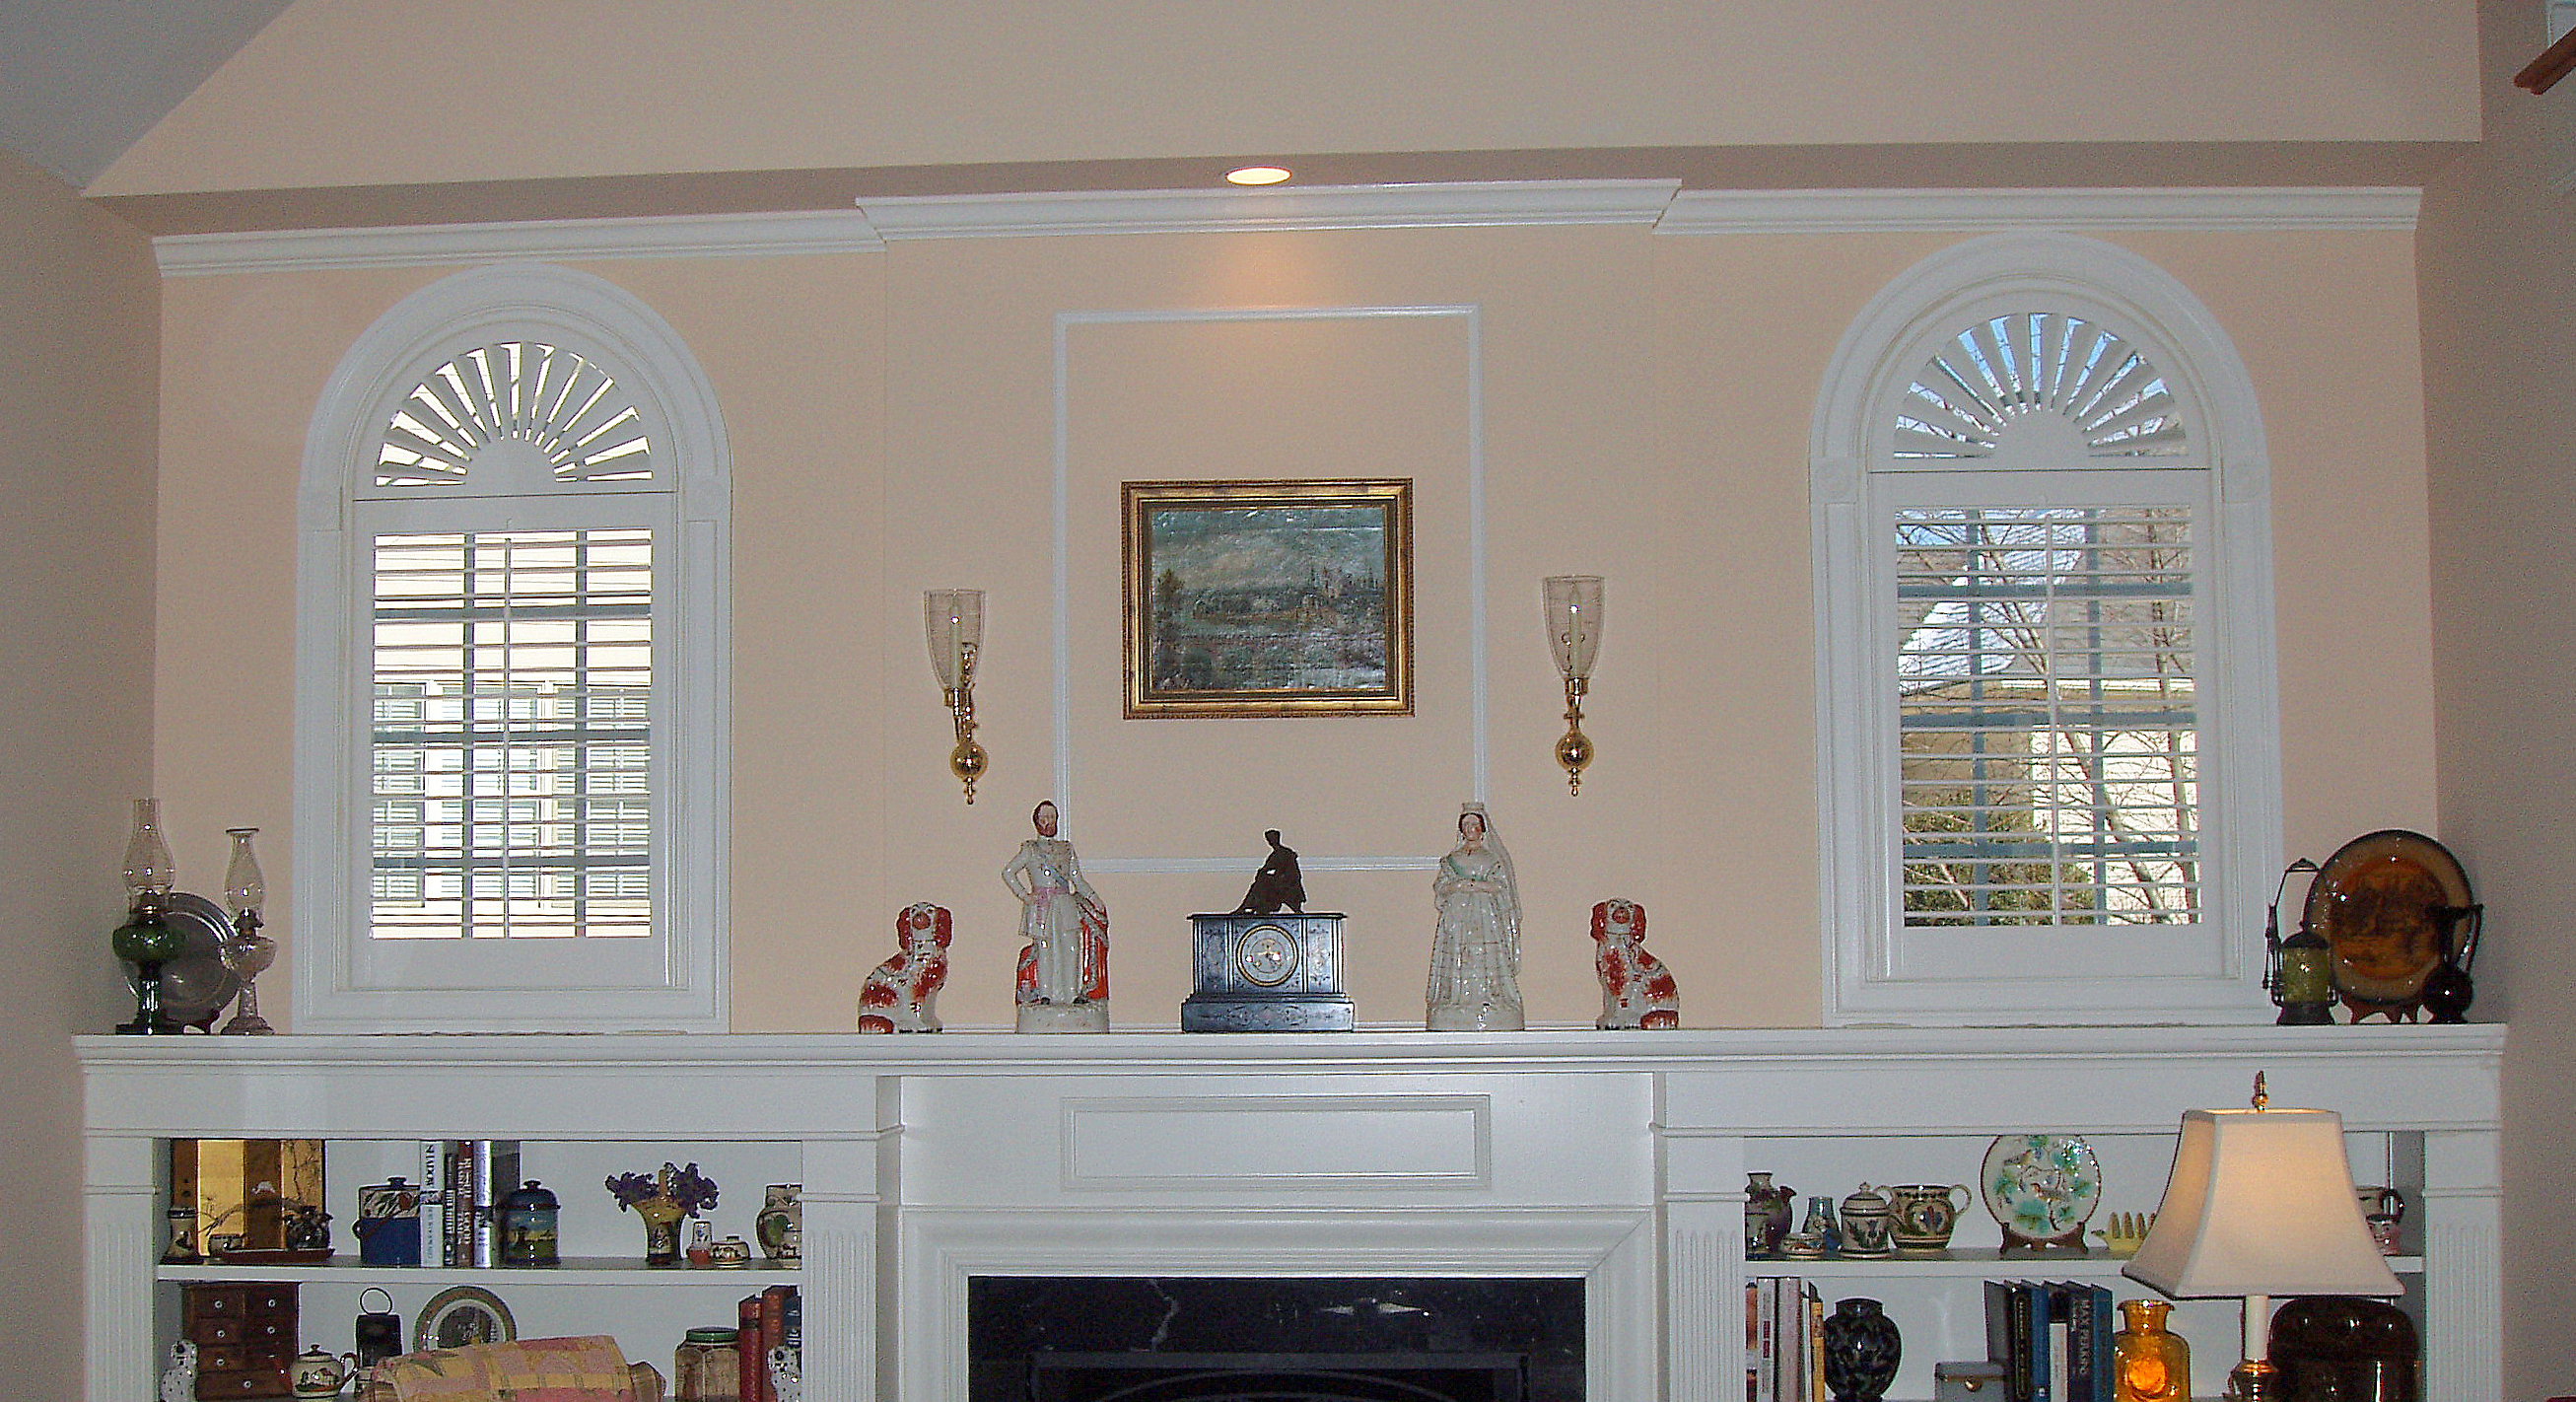 Arched Panel Plantation Shutters over fireplace